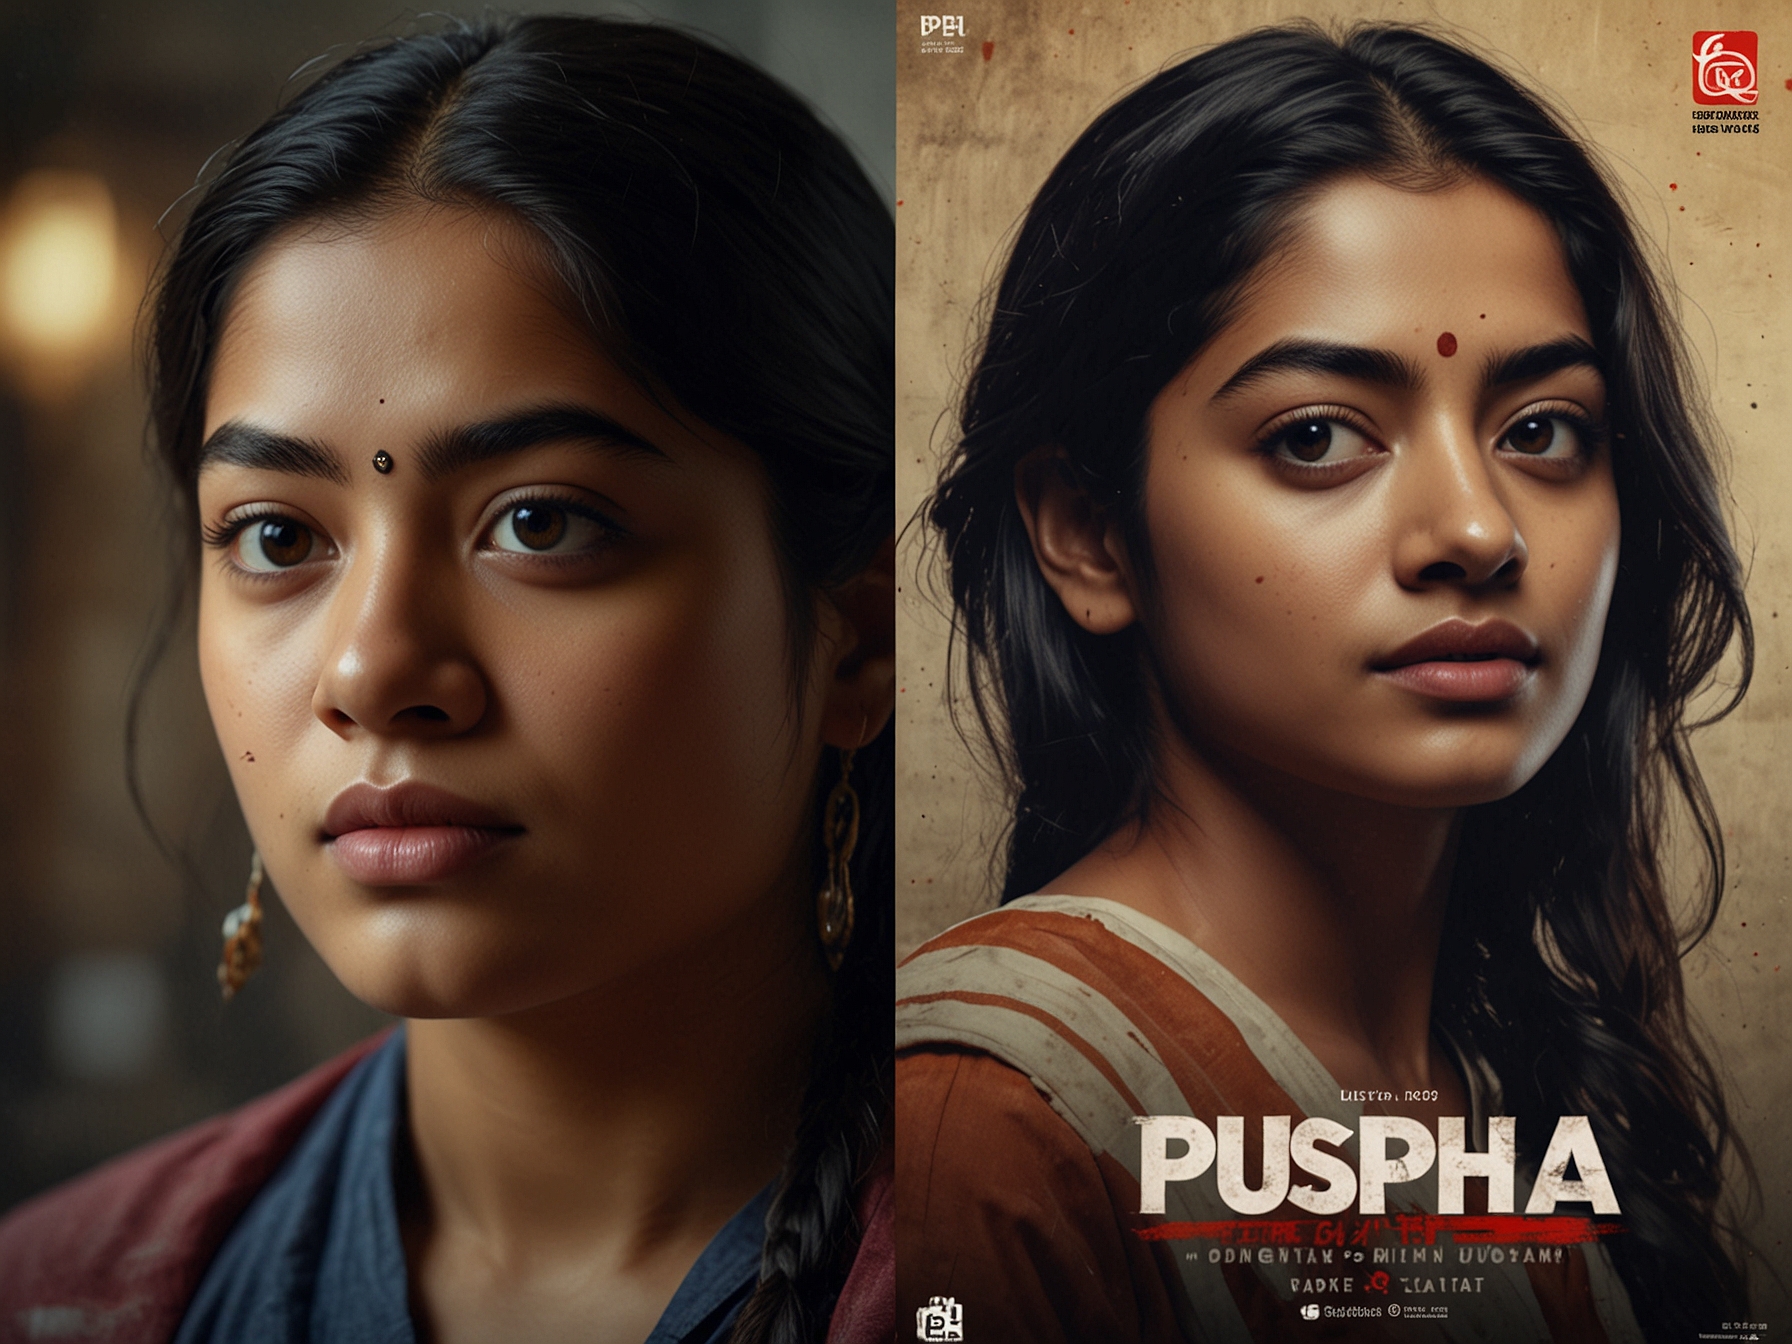 Promotional posters for 'Pushpa: The Rule' and 'Chhava' side-by-side, highlighting the major box office clash expected in December, featuring Rashmika Mandanna in both films.